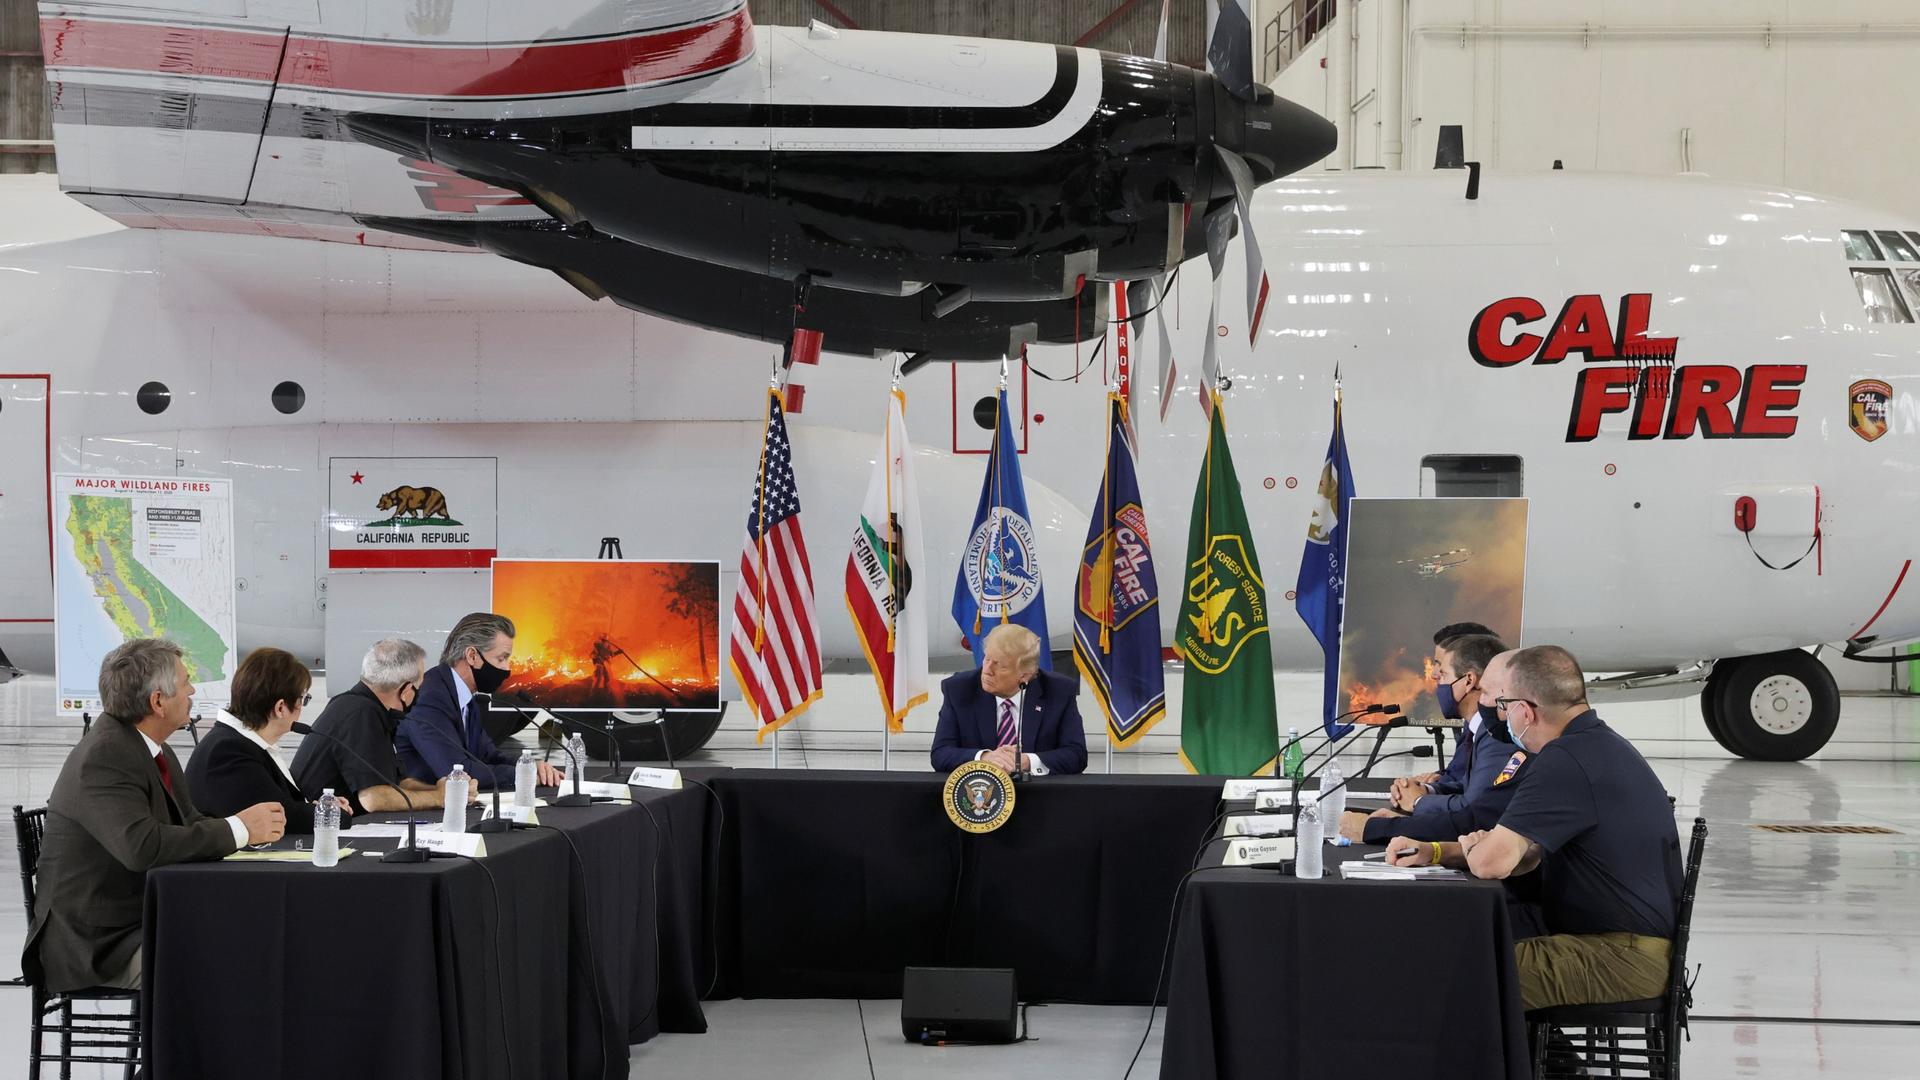 US President Donald Trump sits in front of a CAL FIRE firefighting aircraft as California Governor Gavin Newsom speaks during a briefing on wildfires in McClellan Park, Calif., Sept. 14, 2020. 